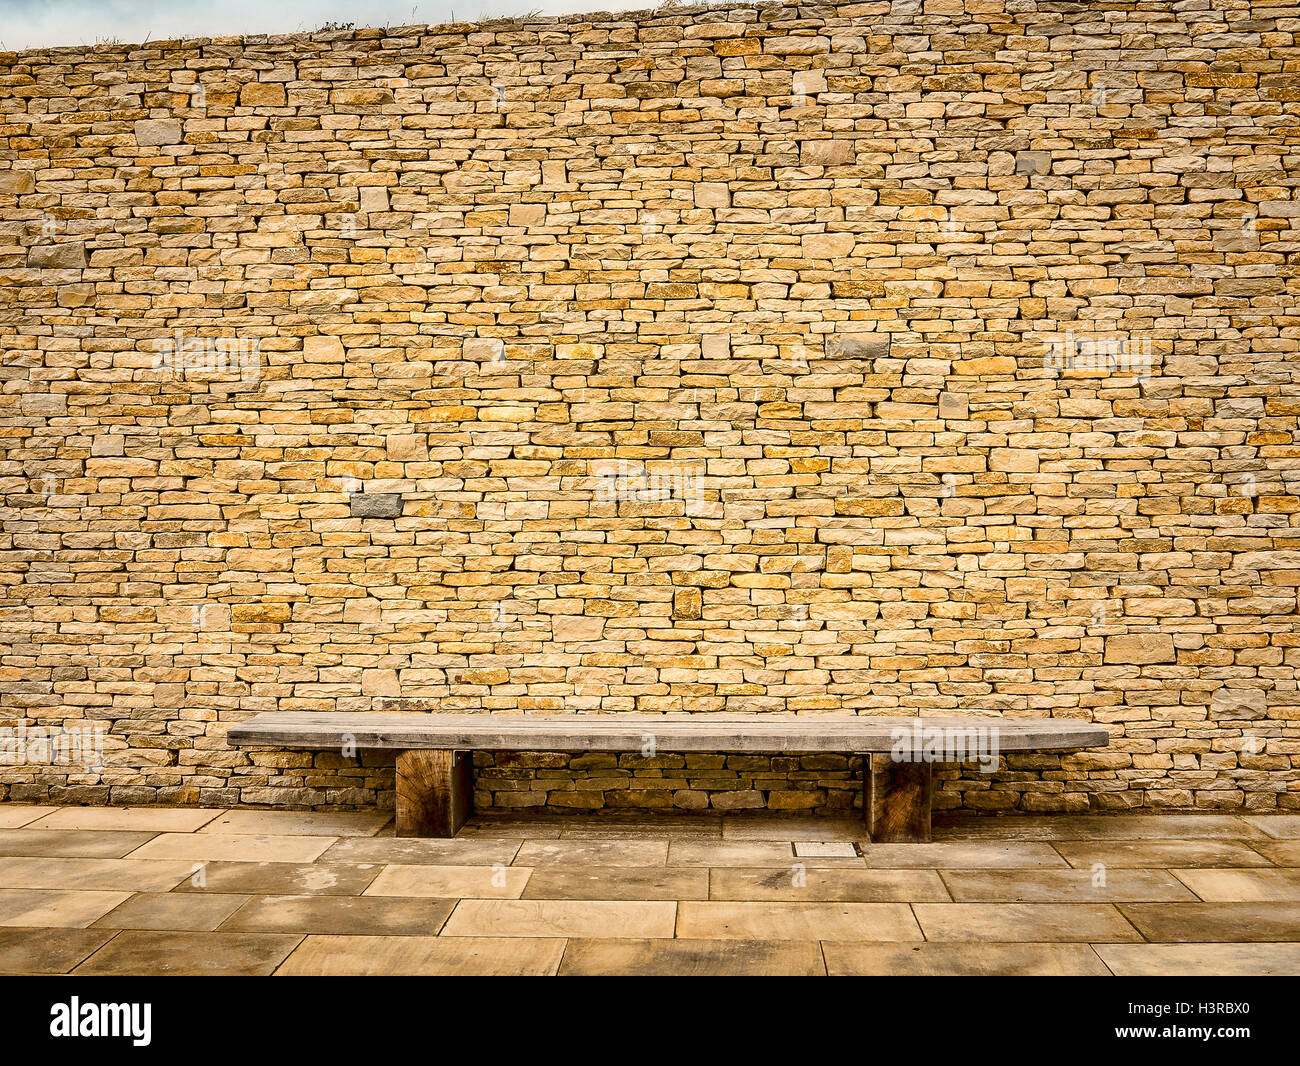 A stone wall with wooden bench seat Stock Photo